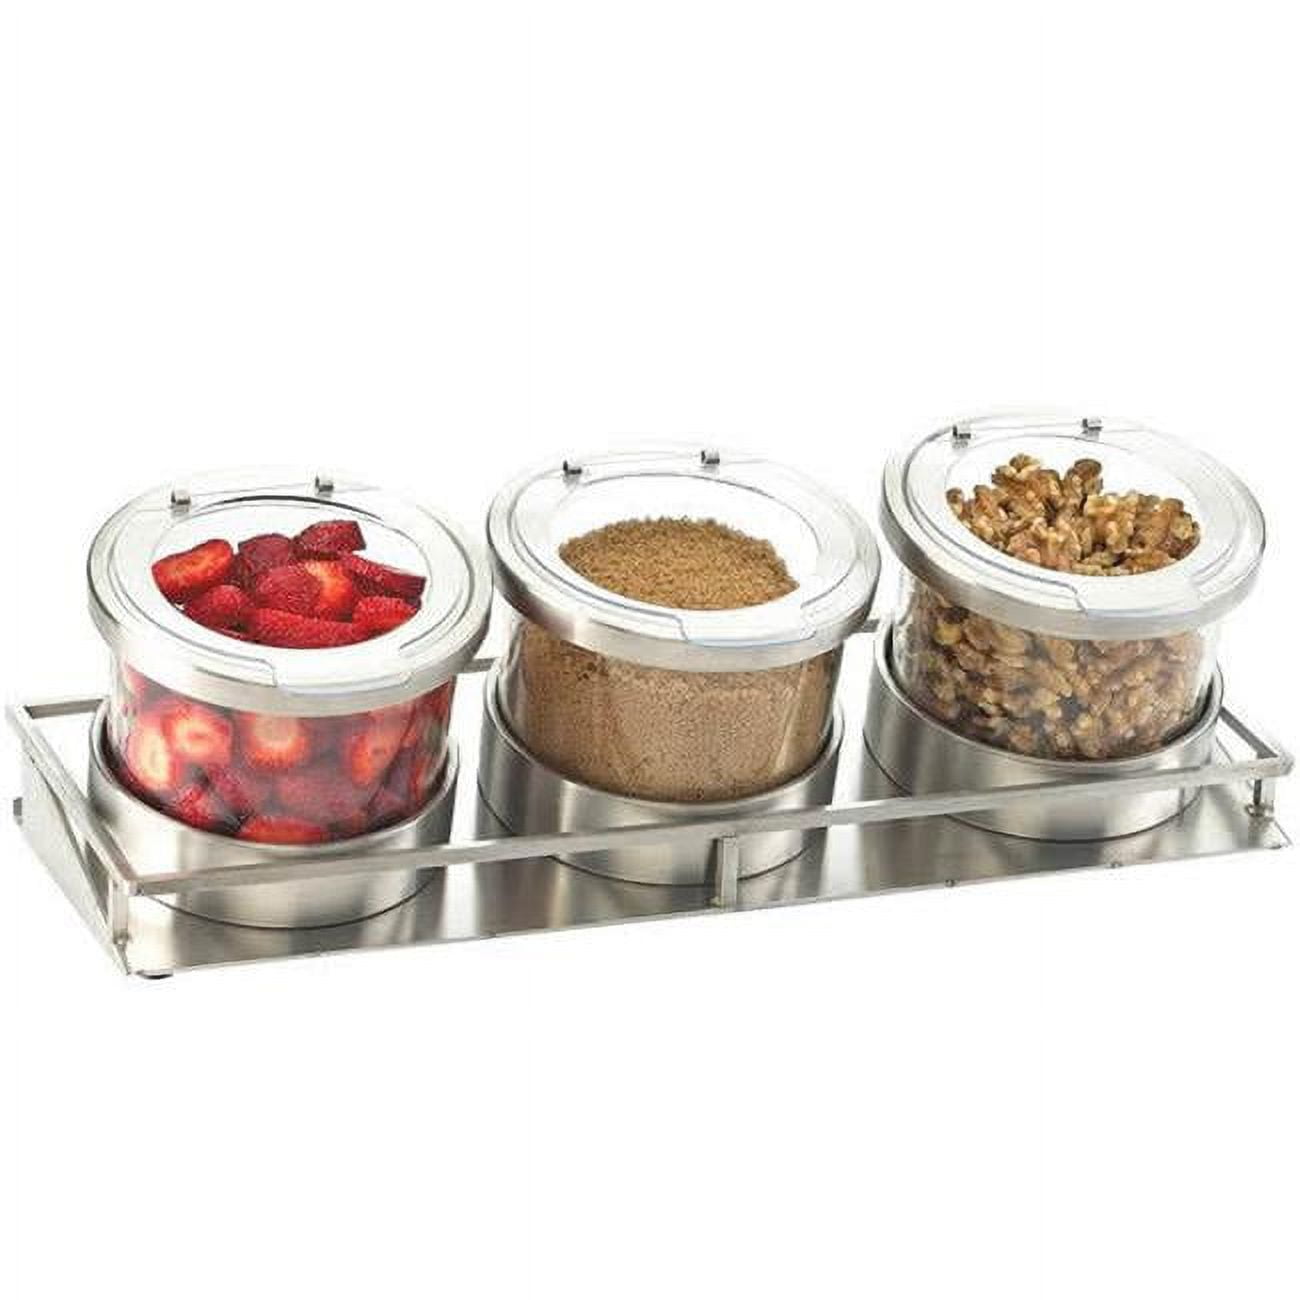 1850-5-55hl Mixology Stainless Steel 3 Jar Horizontal Display With Hinged Lids - Silver